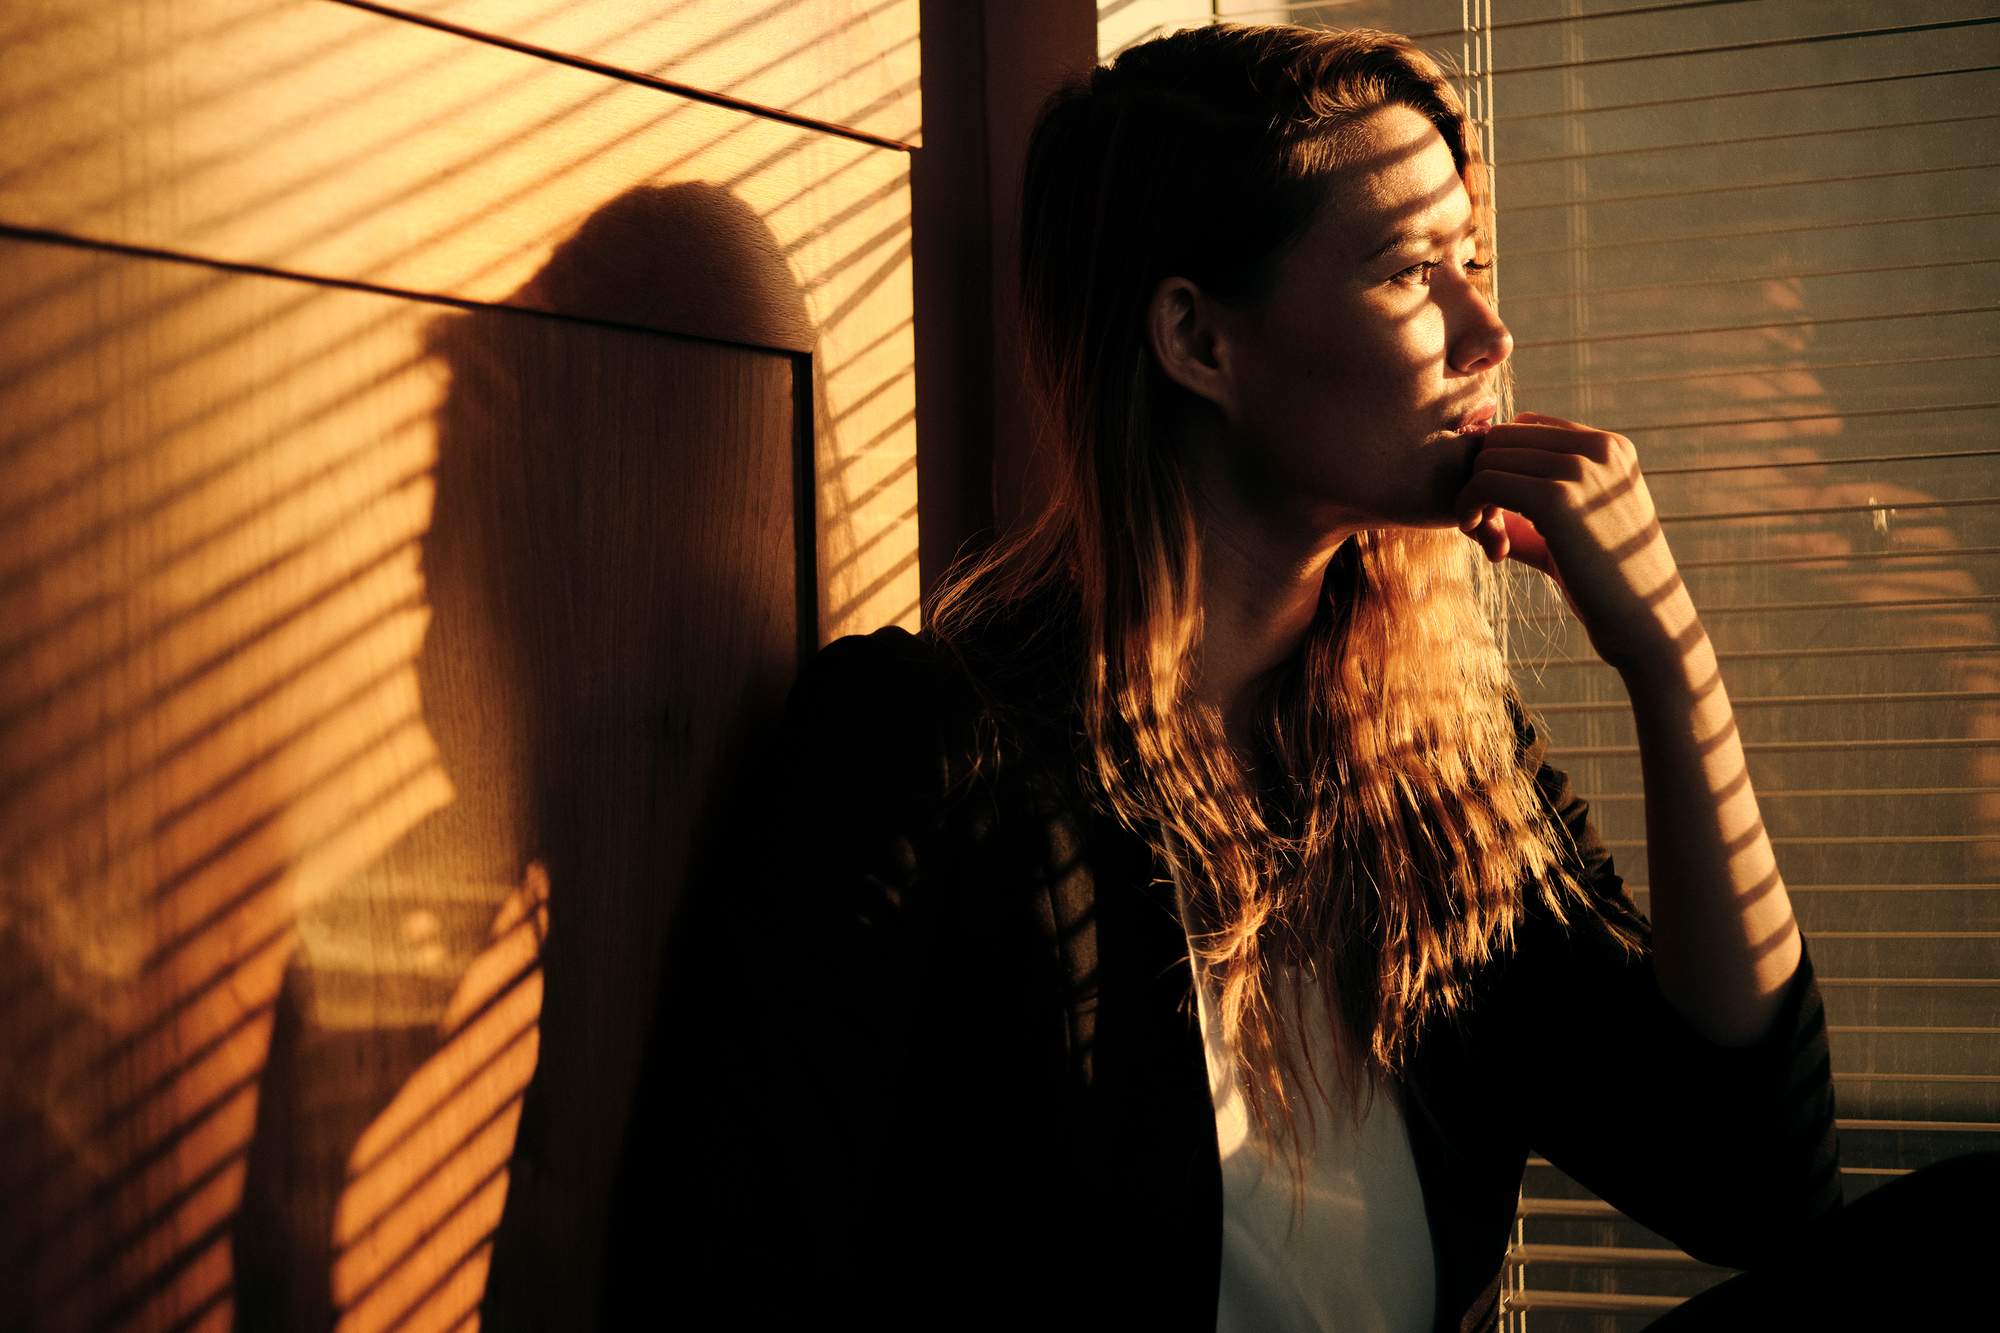 A woman with long hair sits pensively against a wall, bathed in warm sunlight streaming through blinds. The light creates striped shadows across her face and her reflection can be seen in a nearby window.